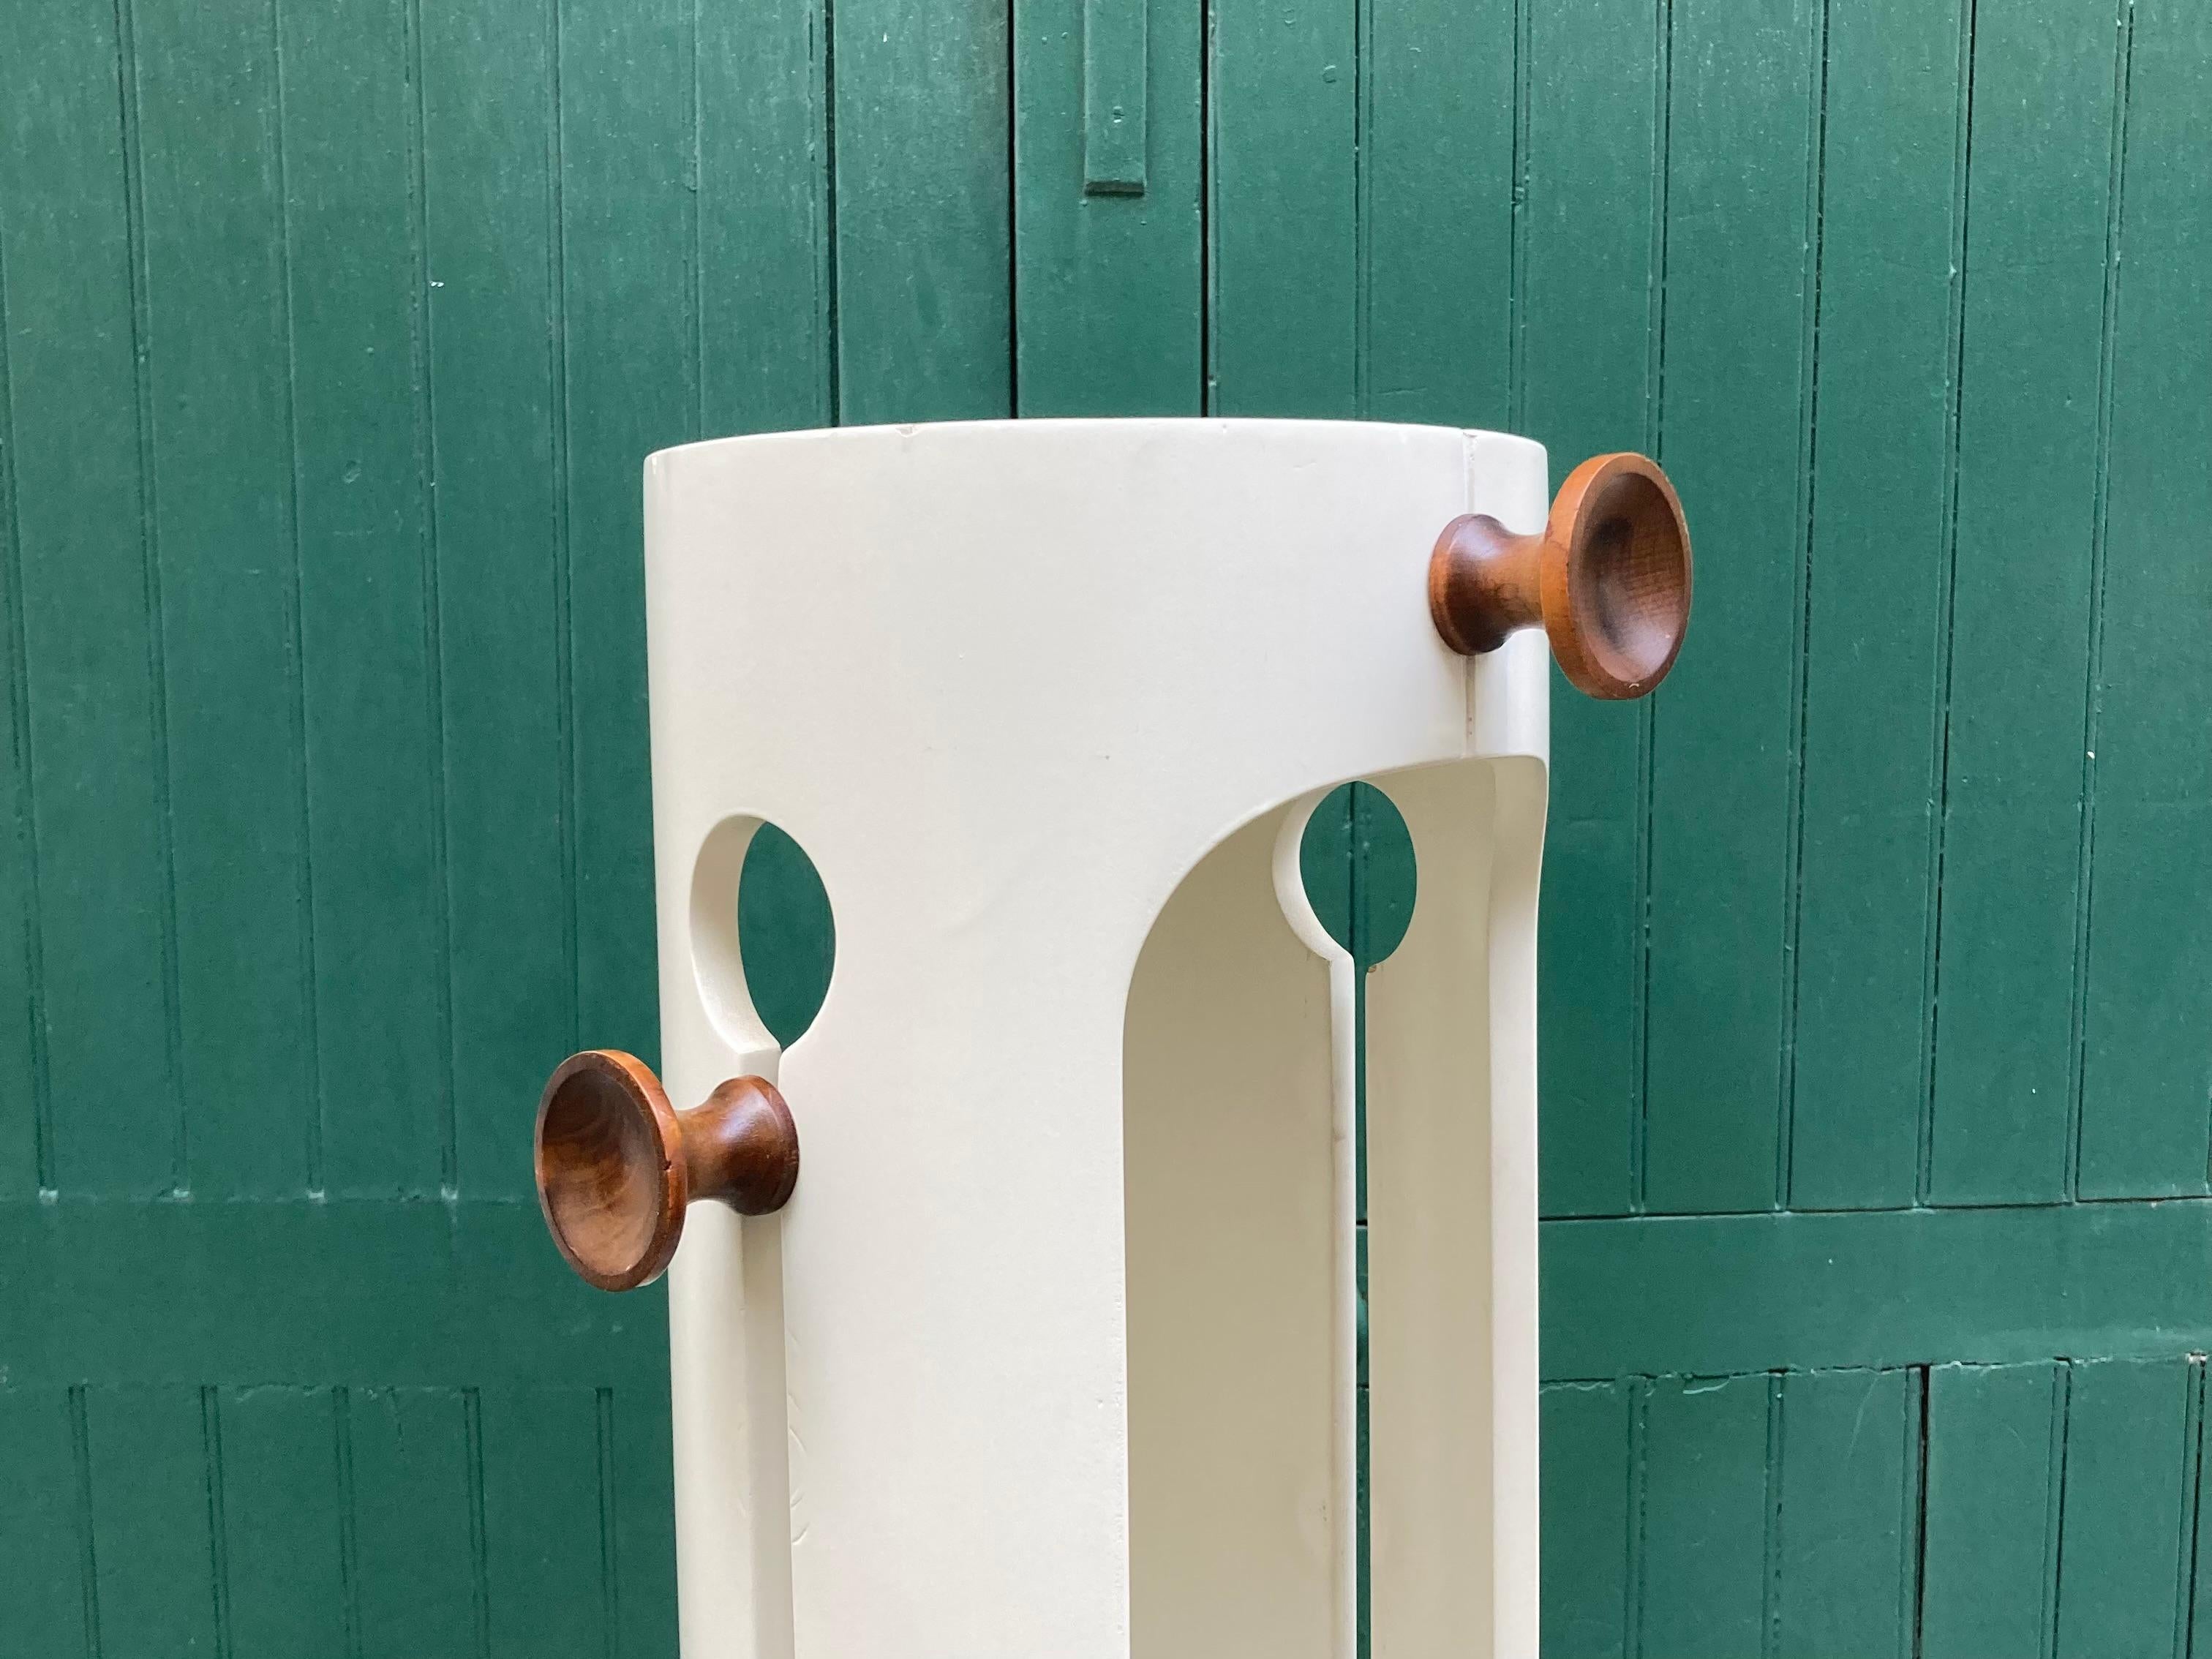 Coat hanger designed by Carlo de Carli for Fiarm.
The structure is in white lackered wood, it swivels on its base.
4 knobs to hang the clothes, 2 of which adjustable along the vertical cutout.
Condition is very good.